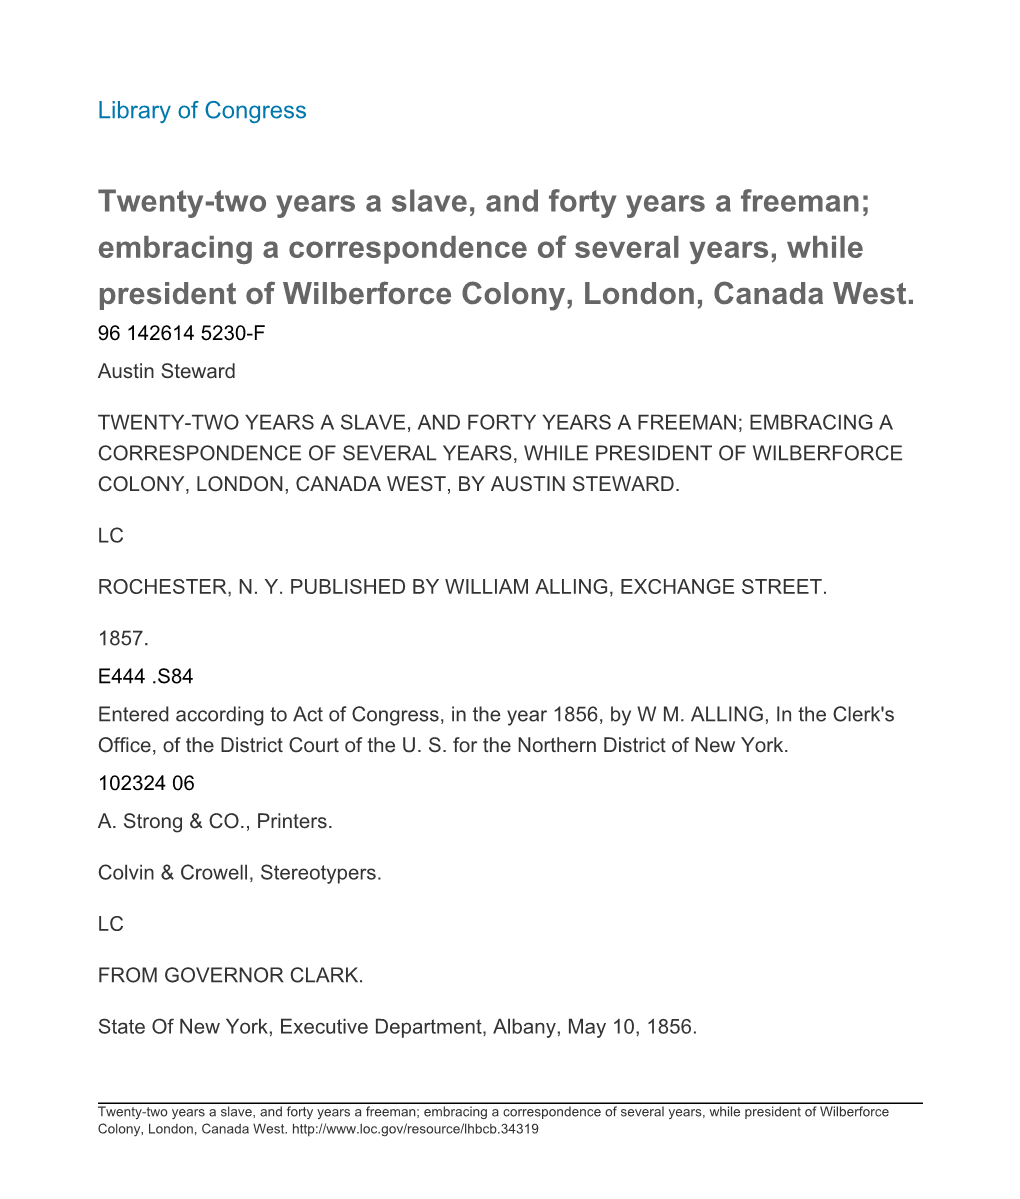 Twenty-Two Years a Slave, and Forty Years a Freeman; Embracing a Correspondence of Several Years, While President of Wilberforce Colony, London, Canada West